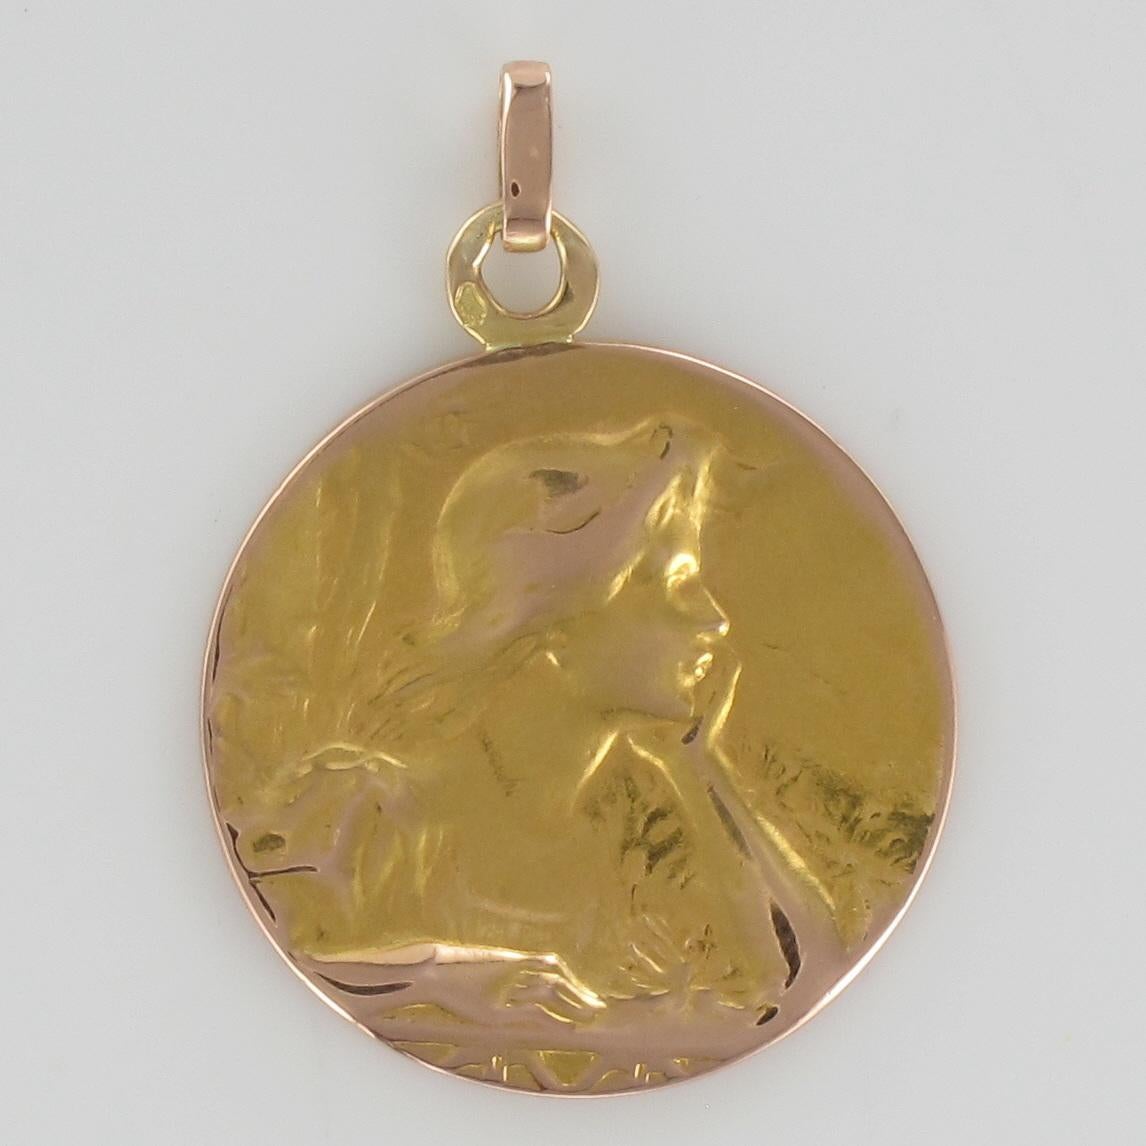 Medal in 18 karat rose gold, eagle head hallmark.
Charming antique rose gold medal representing the portrait of a young woman in a naturalist decoration carried out with much smoothness and precision.
Total length : 3 cm, width at the widest : 2,2